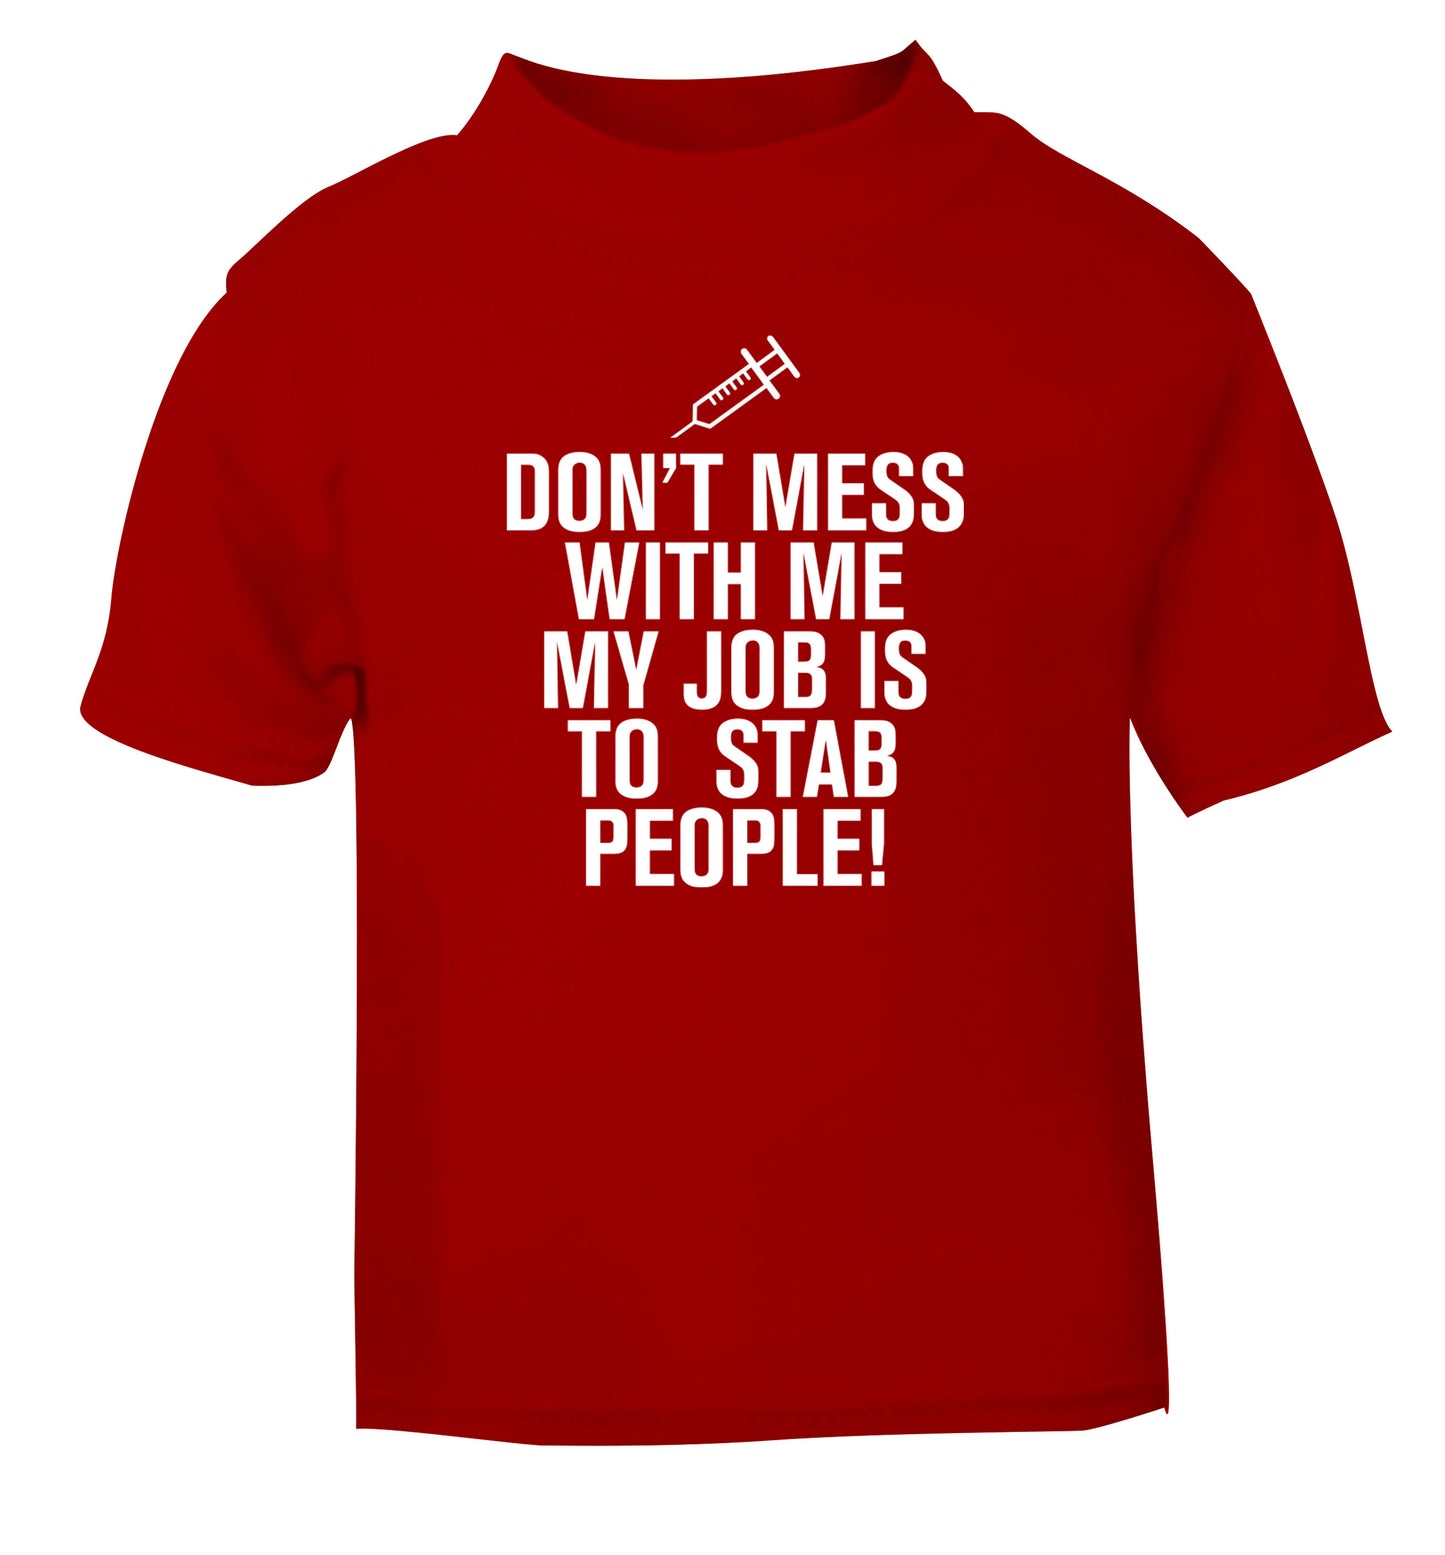 Don't mess with me my job is to stab people! red Baby Toddler Tshirt 2 Years